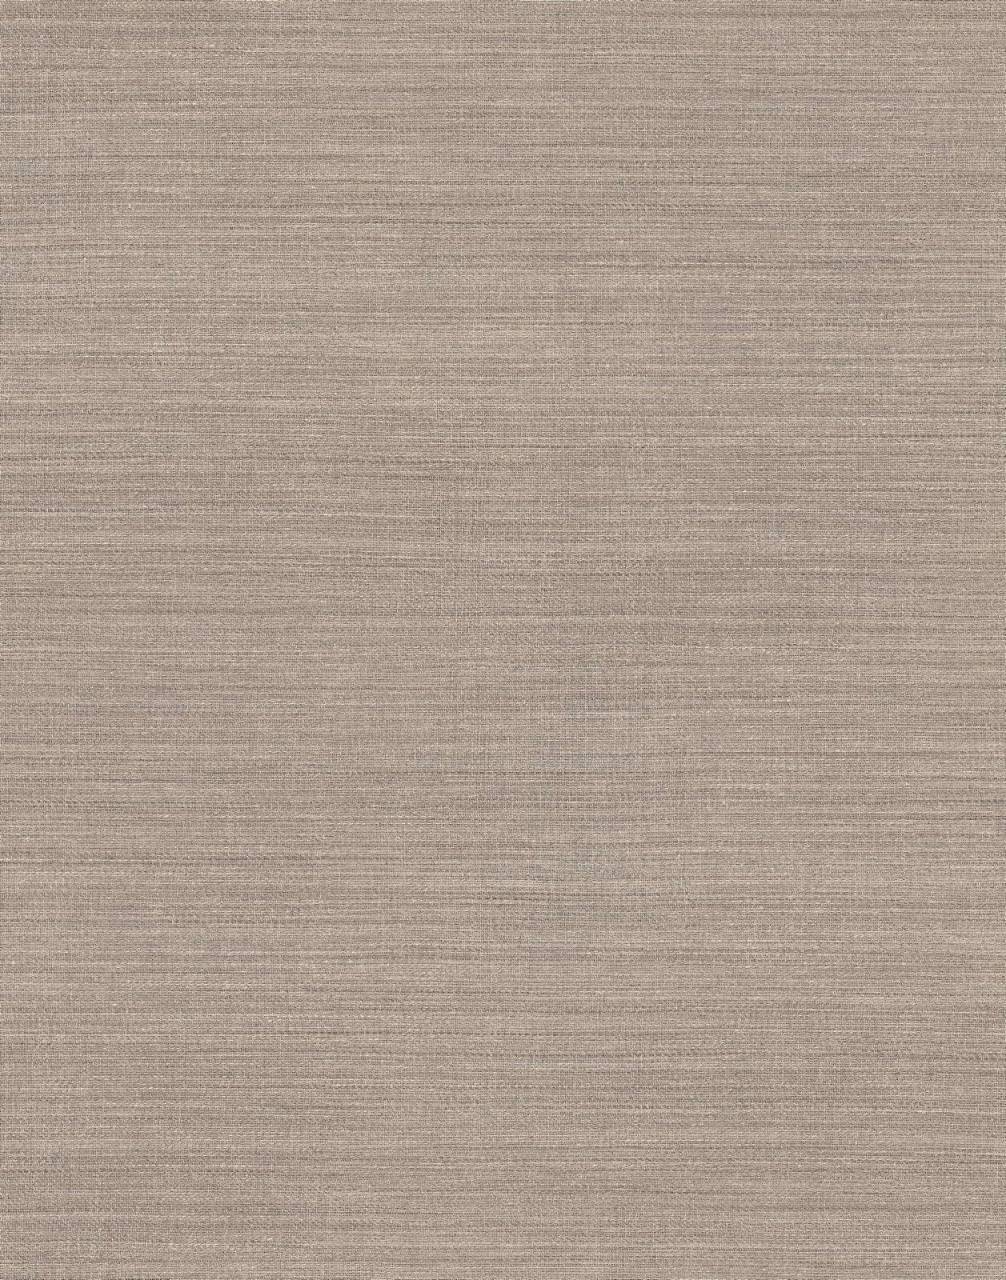 Close-up of K541 Greige Tessea sample, featuring sophisticated Greige Tessea color with warm gray and beige tones